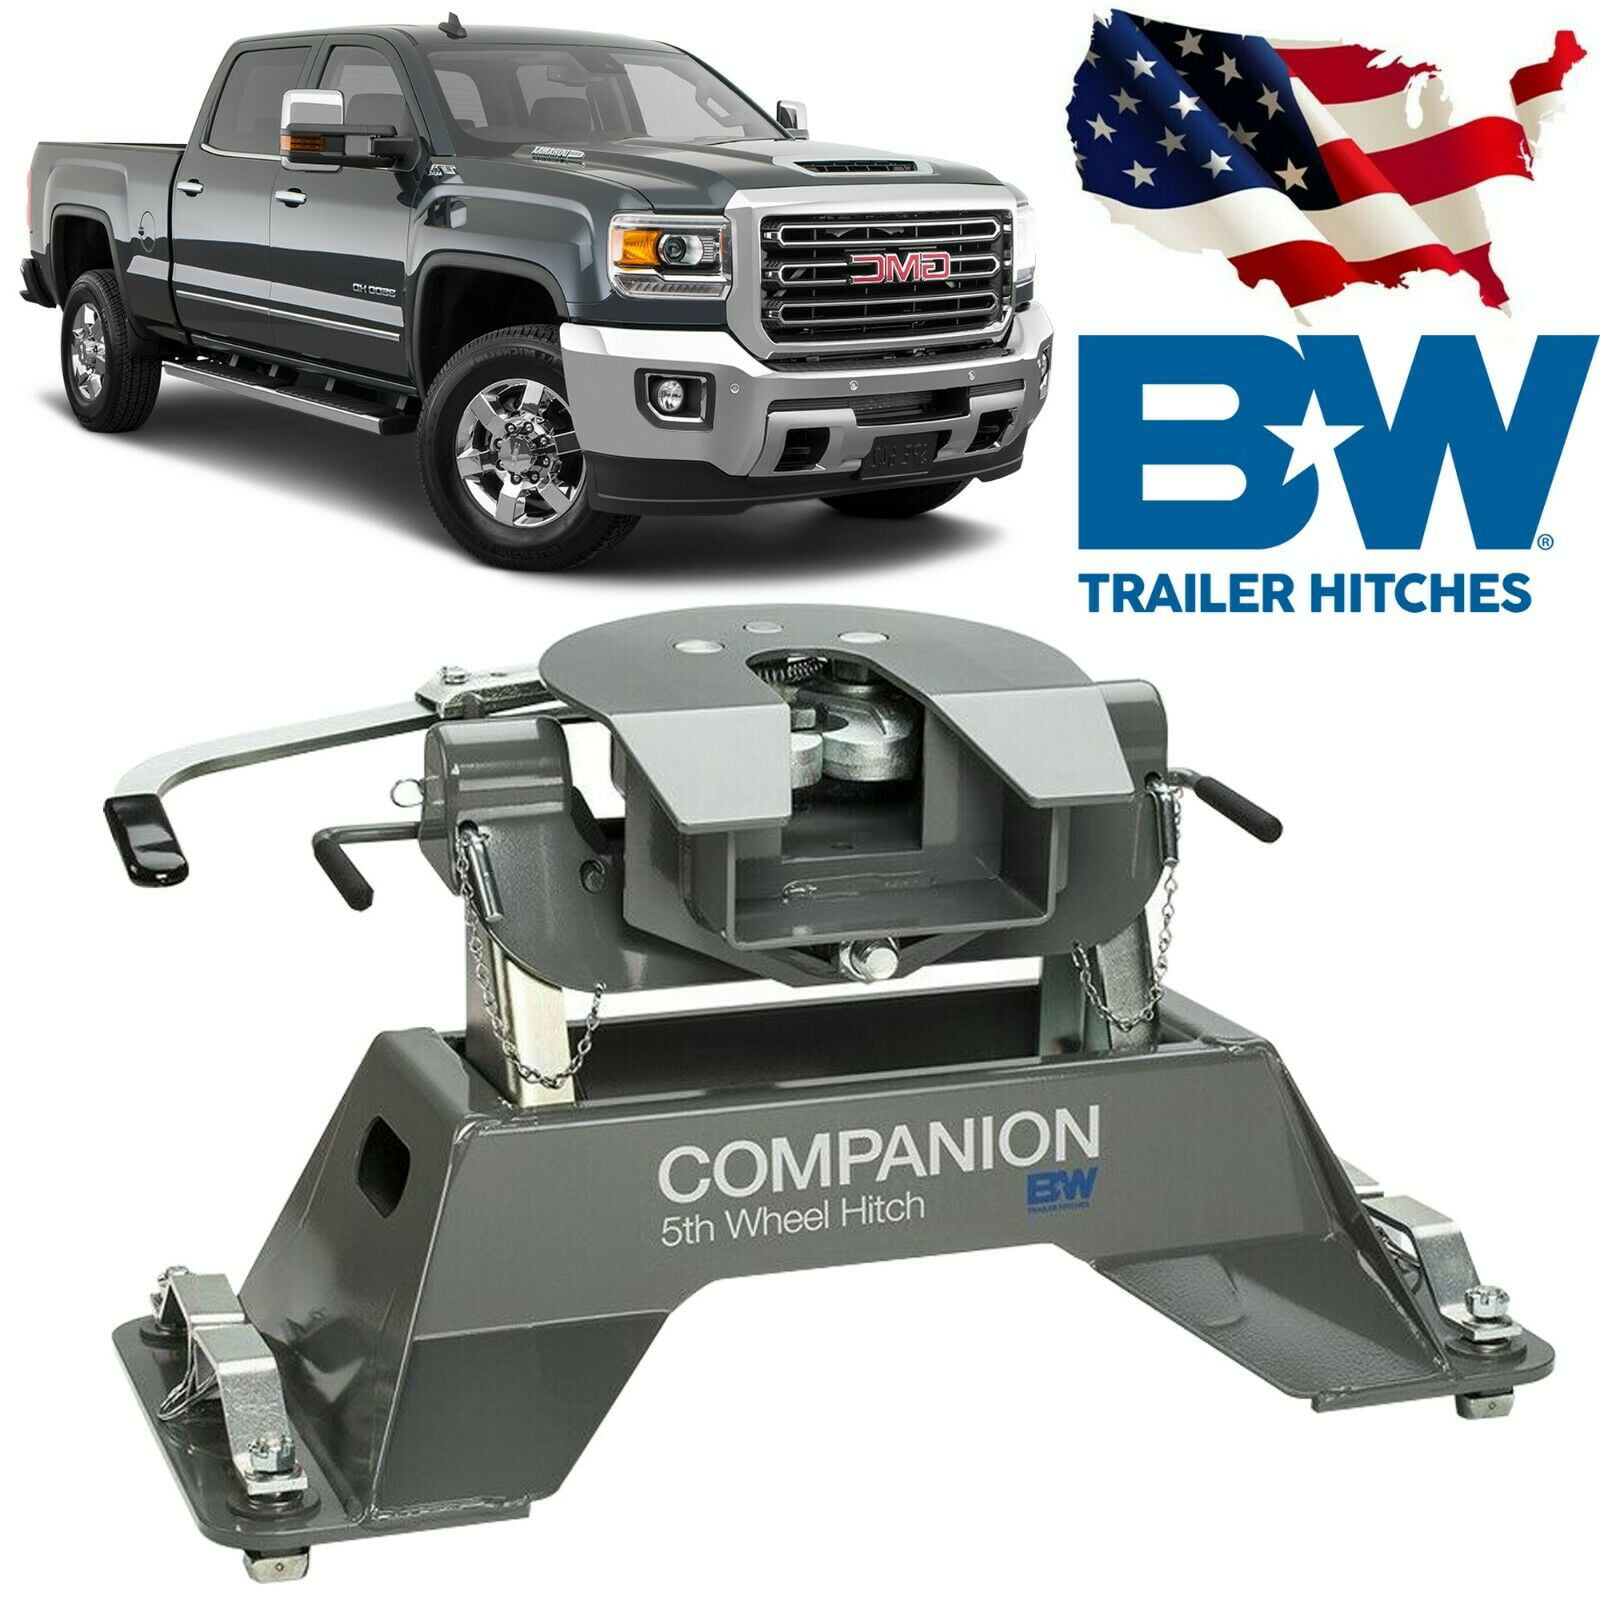 RVK3710 OEM Companion Fifth Wheel Hitch - B&W Hitch for GM Puck System 2020 - Current - Walmart 5th Wheel Hitch For Chevy Puck System